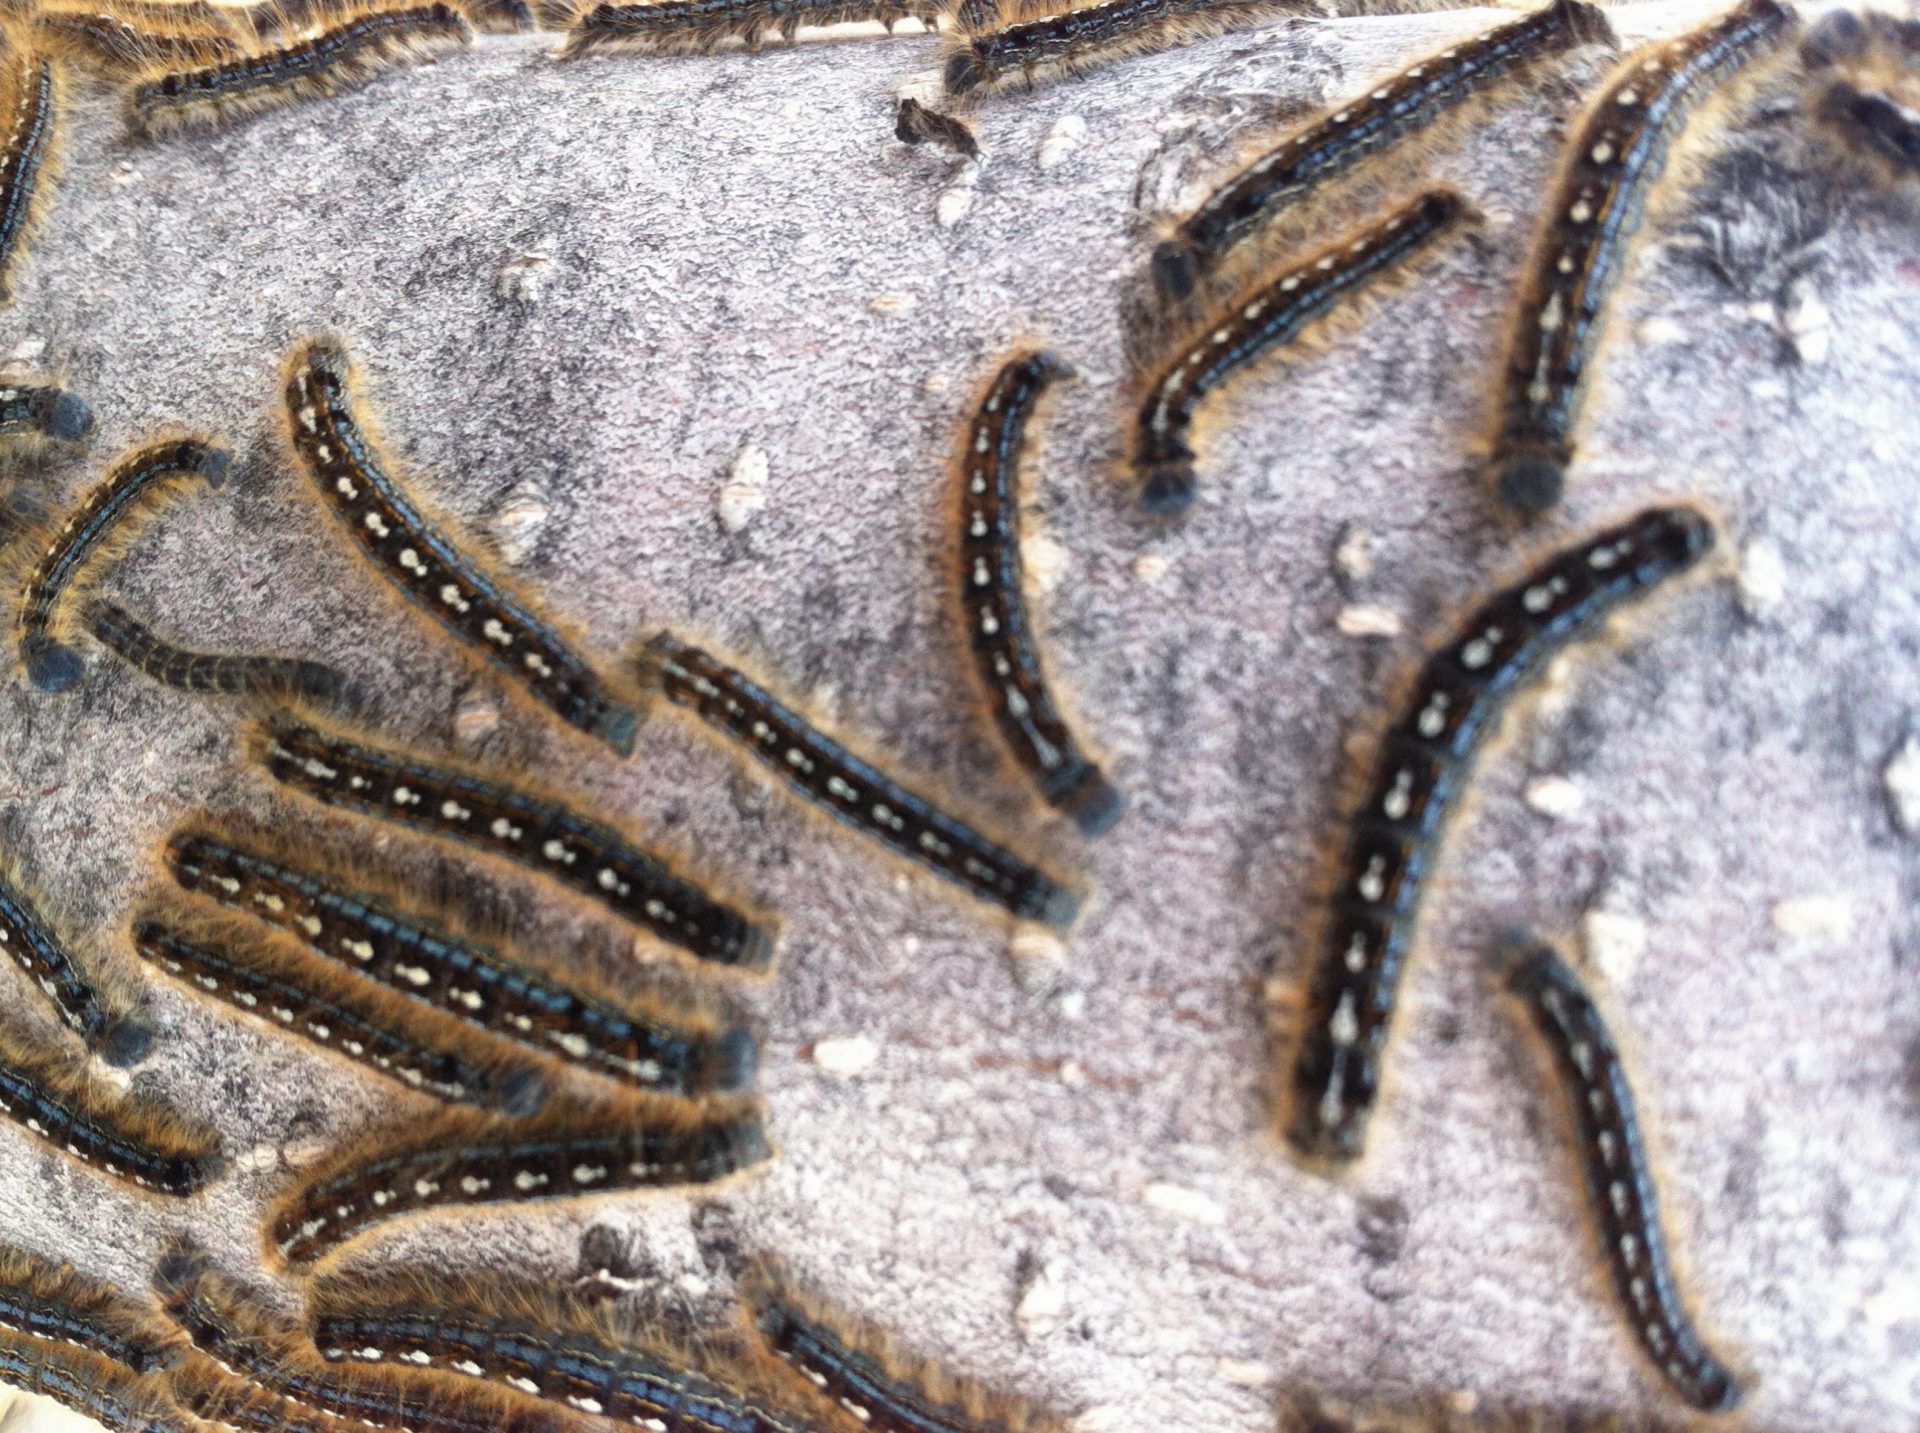 2015 could be big year for forest tent caterpillars